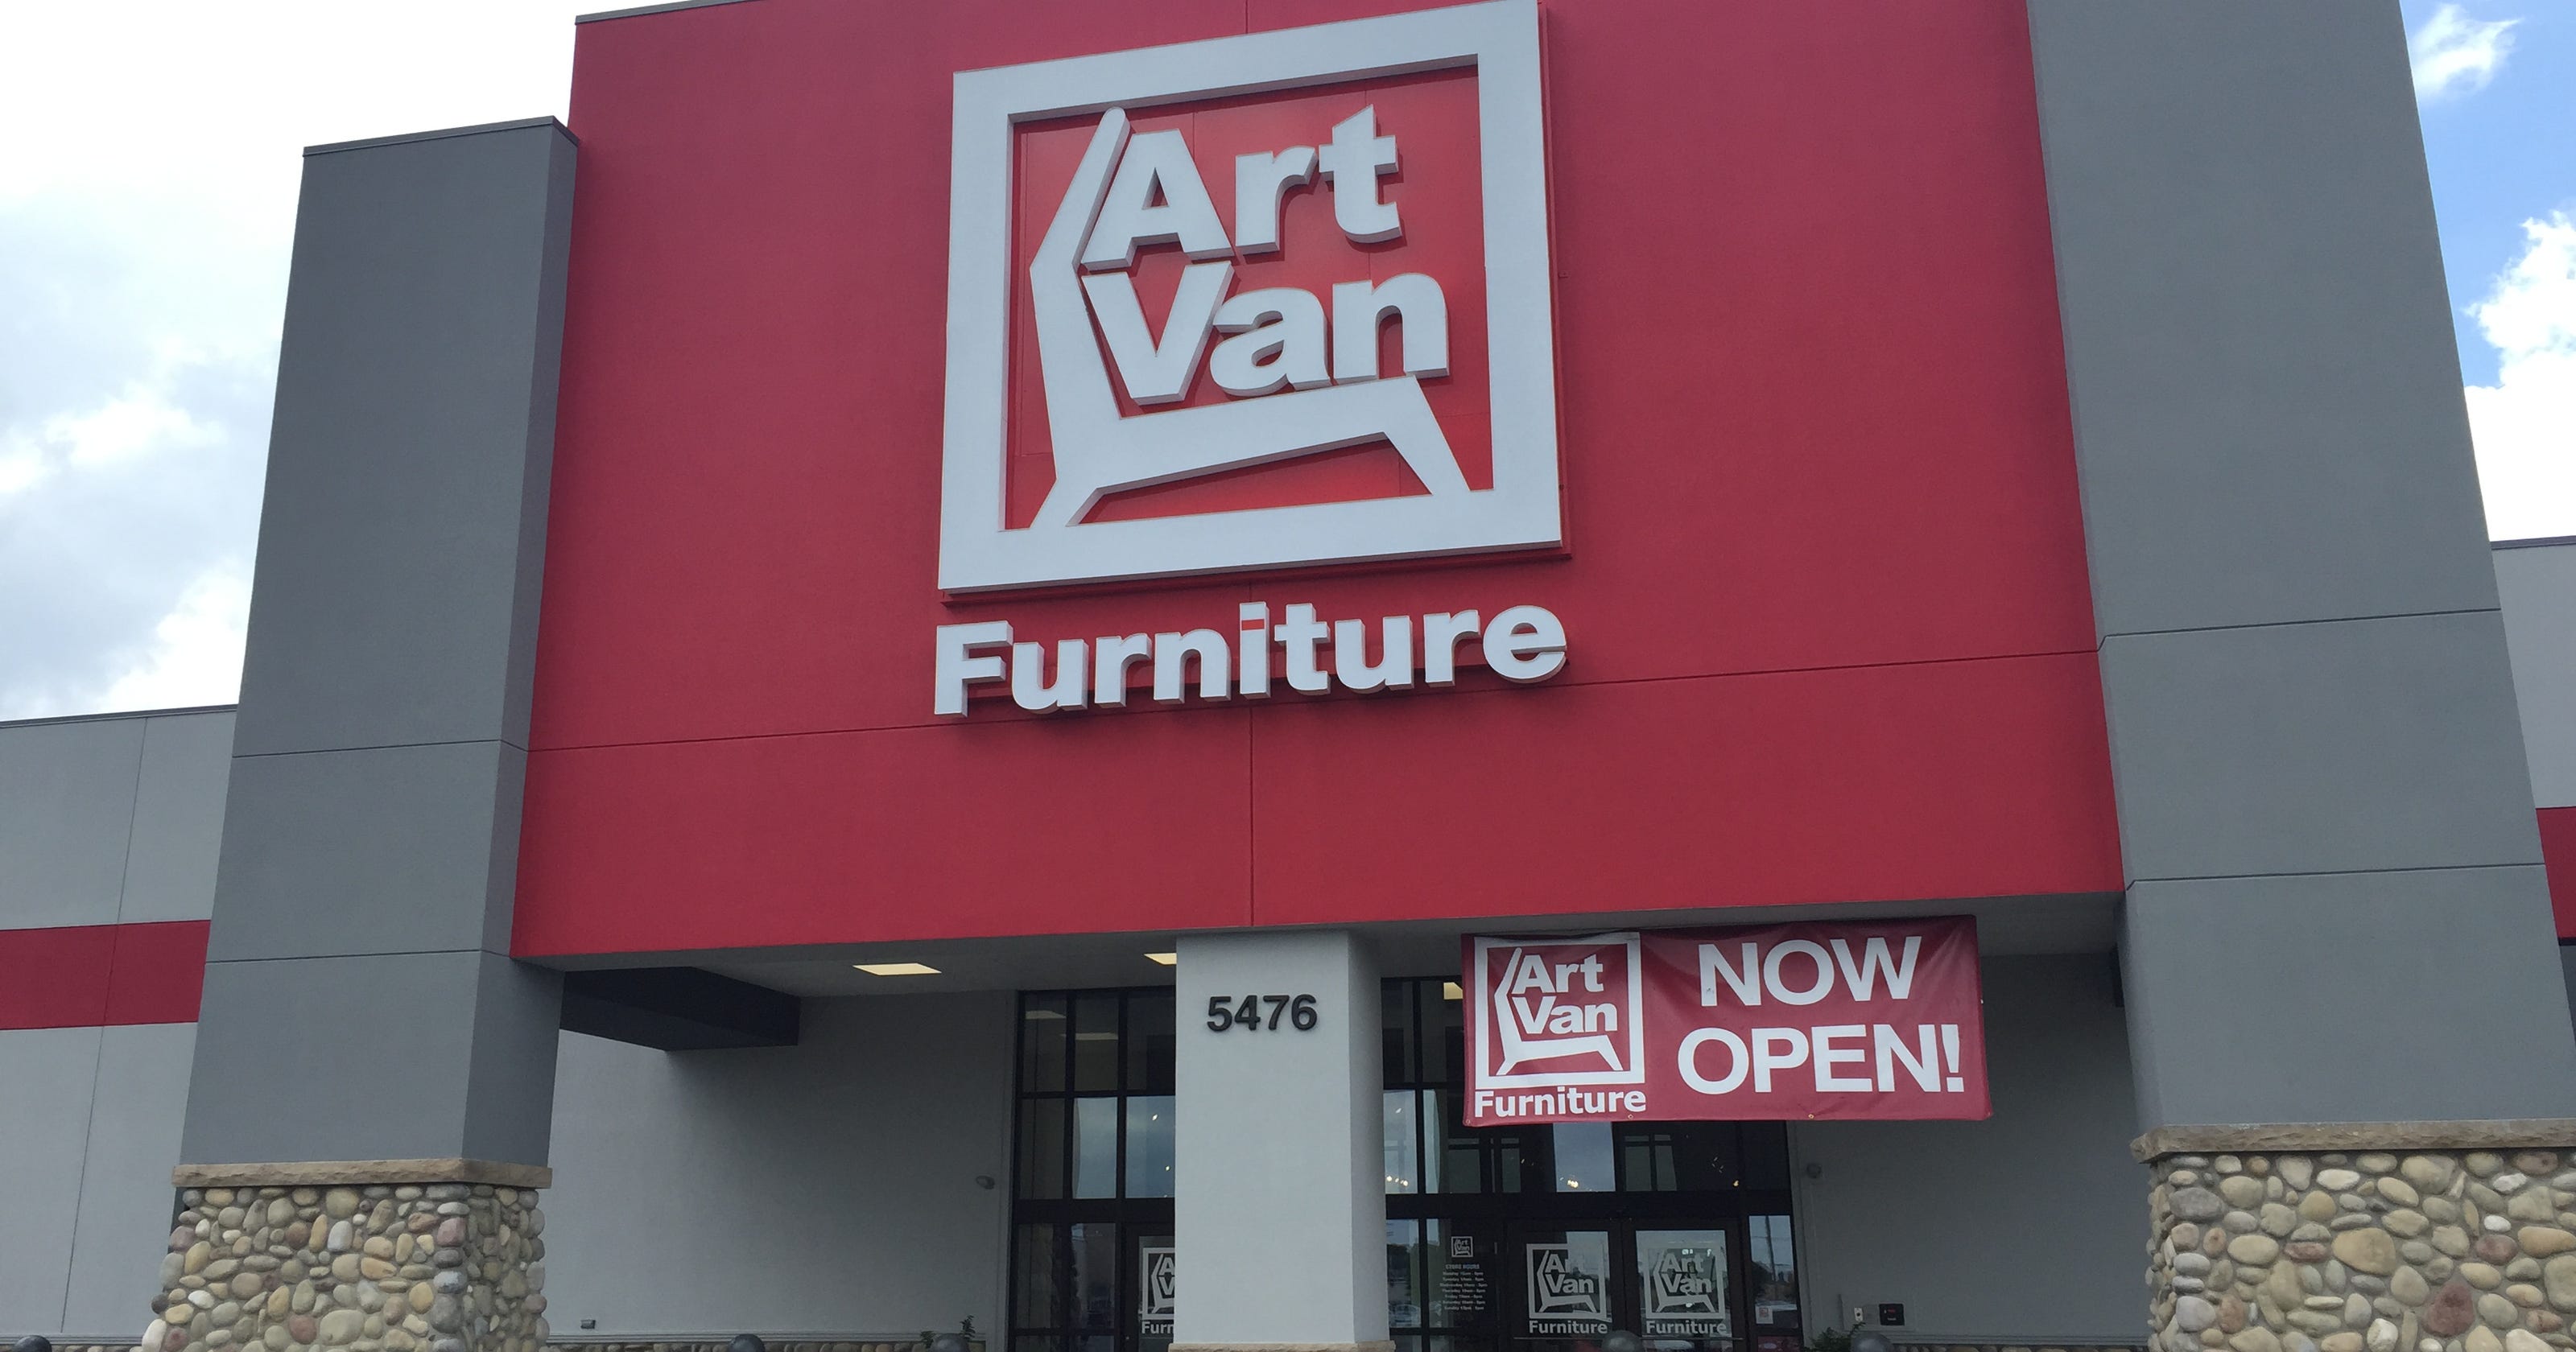 Art Van Furniture Closes Midwest Stores Evansville Is To Stay Open